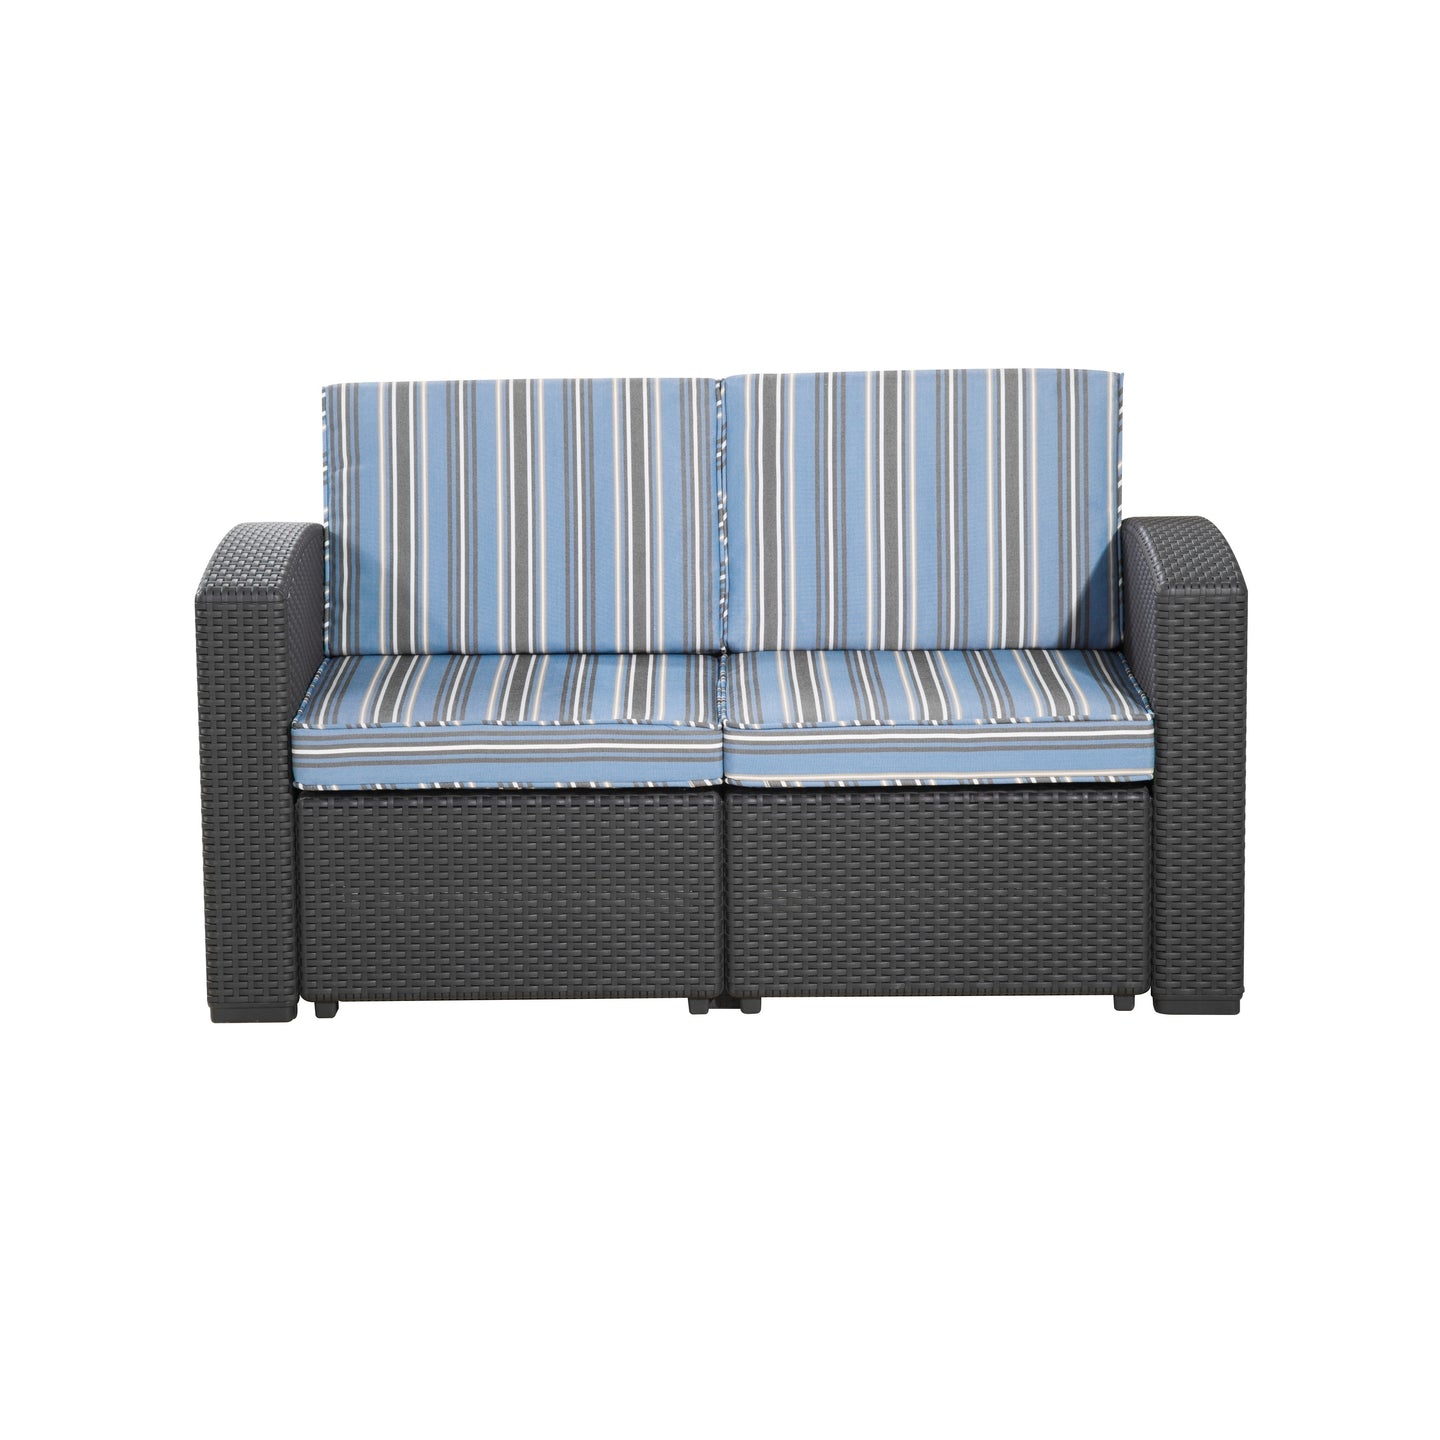 Relax A Lounger Resin Wicker Casual Loveseat Teal Stripe AS IS(1941RR)